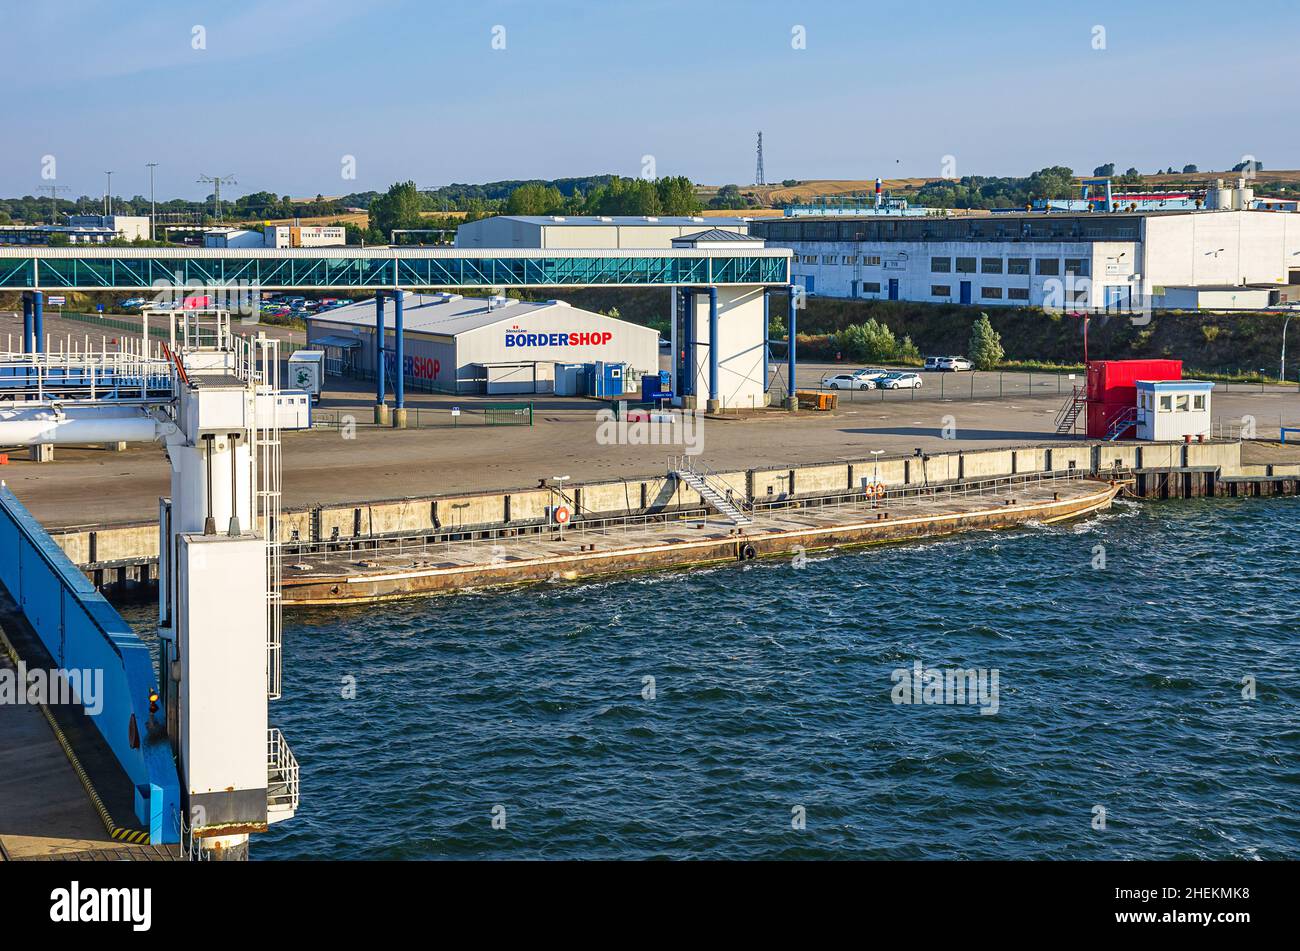 The Border Shop of the Swedish ferry company Stena Line for the purchase of tax-free goods at the ferry port of Sassnitz-Mukran, Germany. Stock Photo